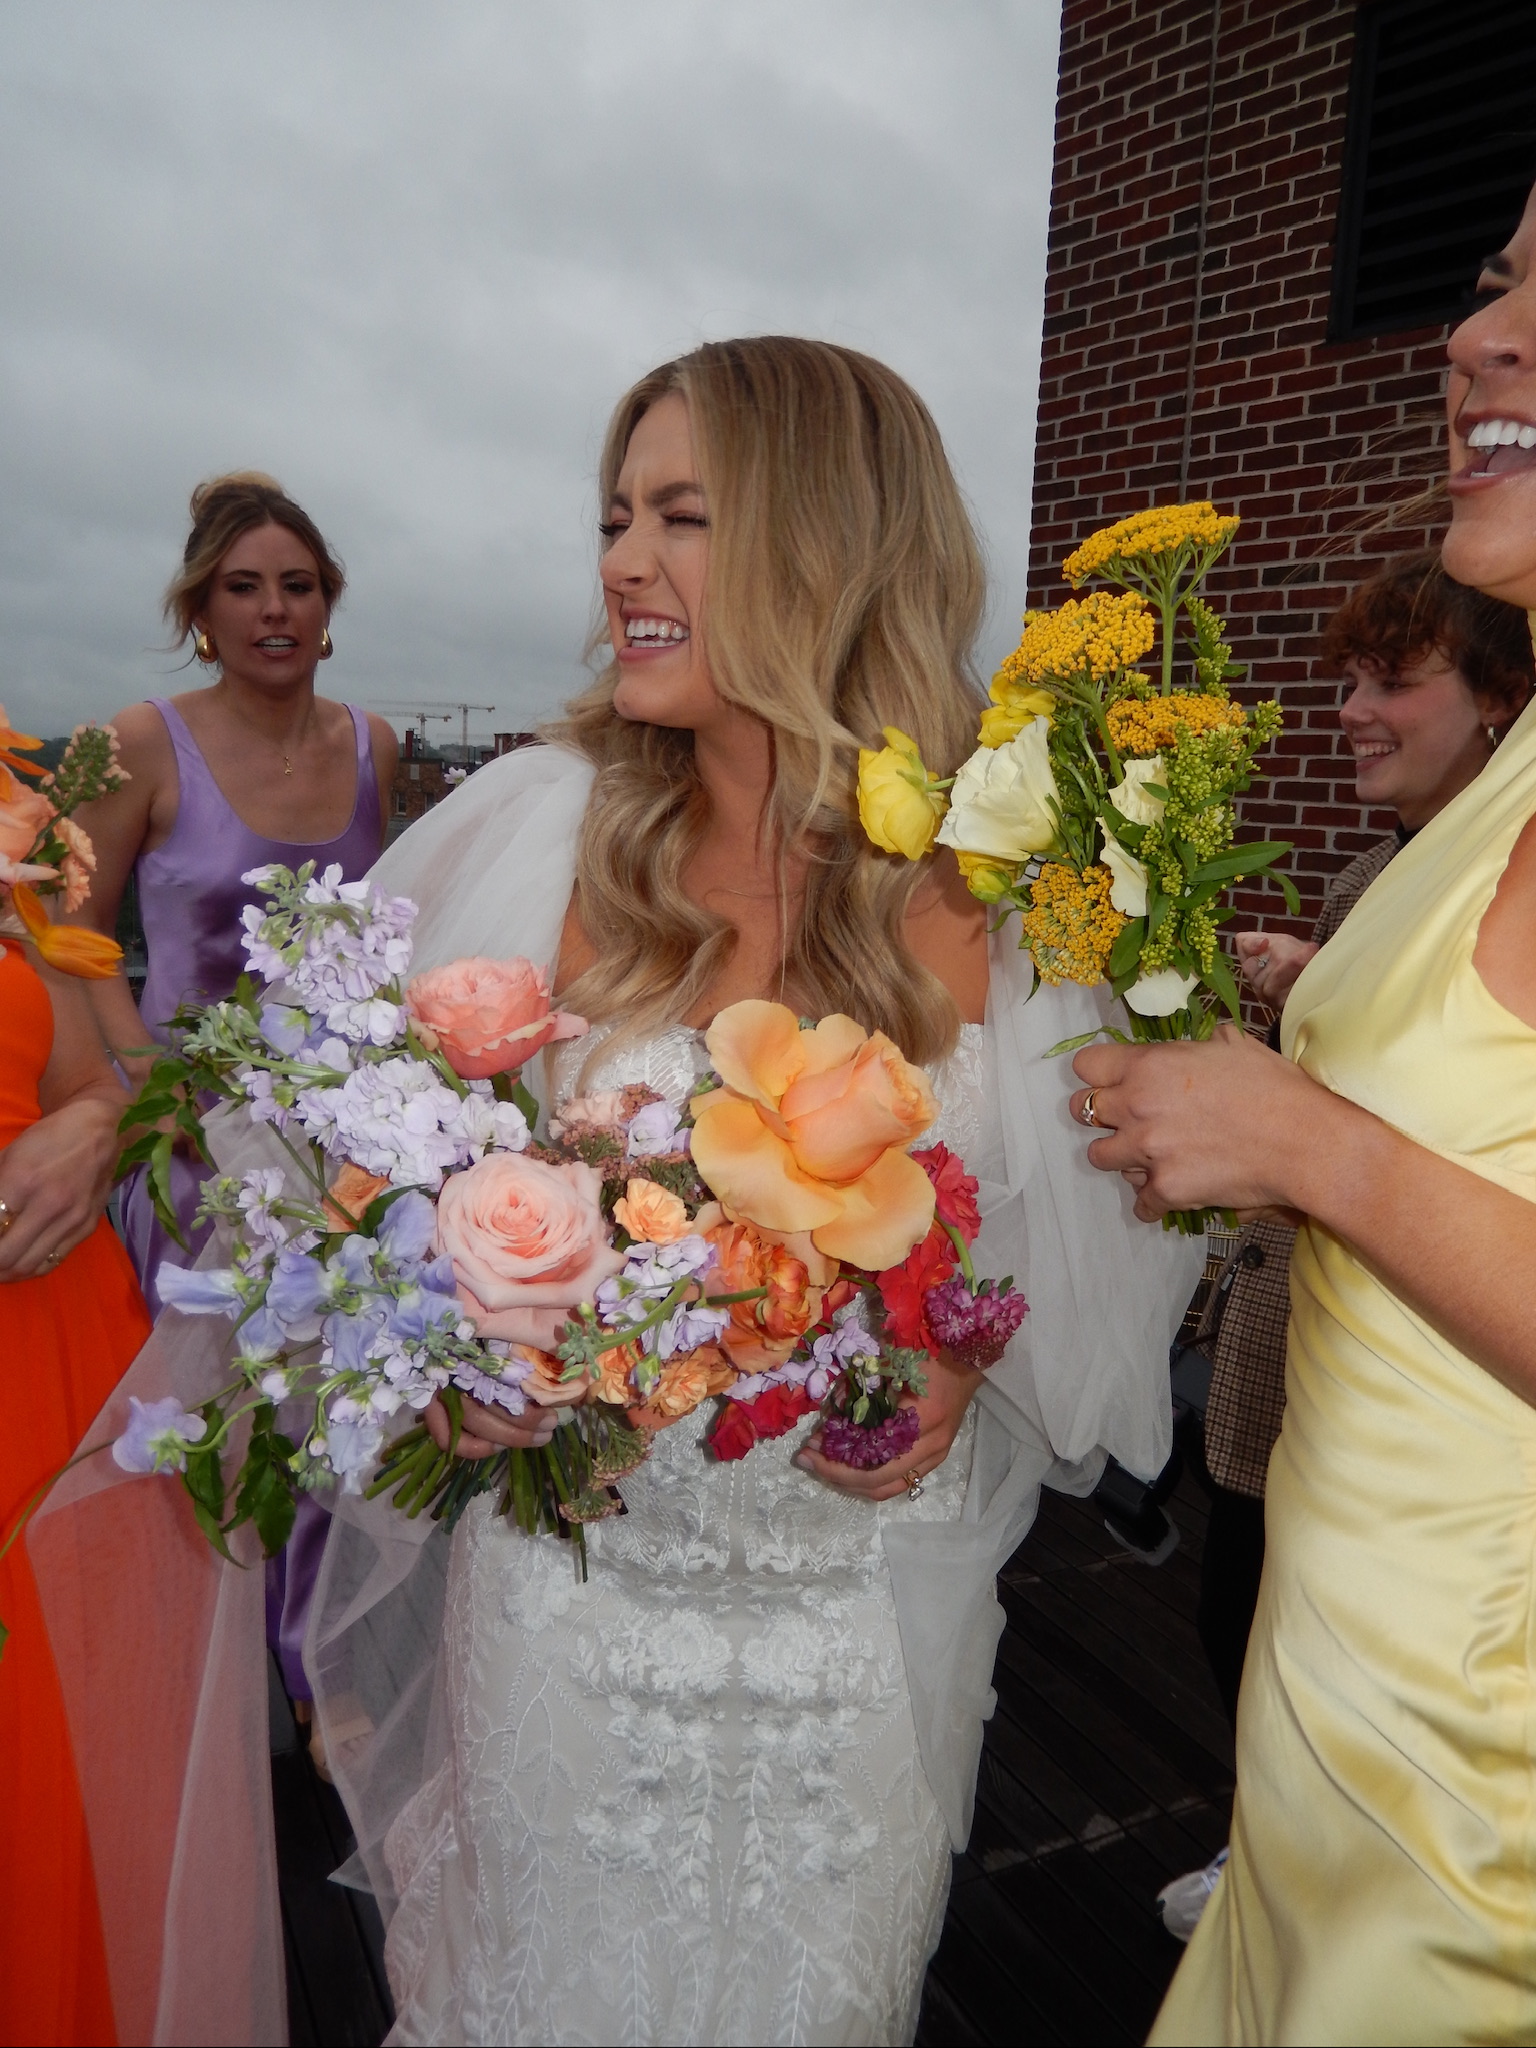 Bride laughing with bridesmaids wearing colorful dresses and carrying florals during wedding content creation